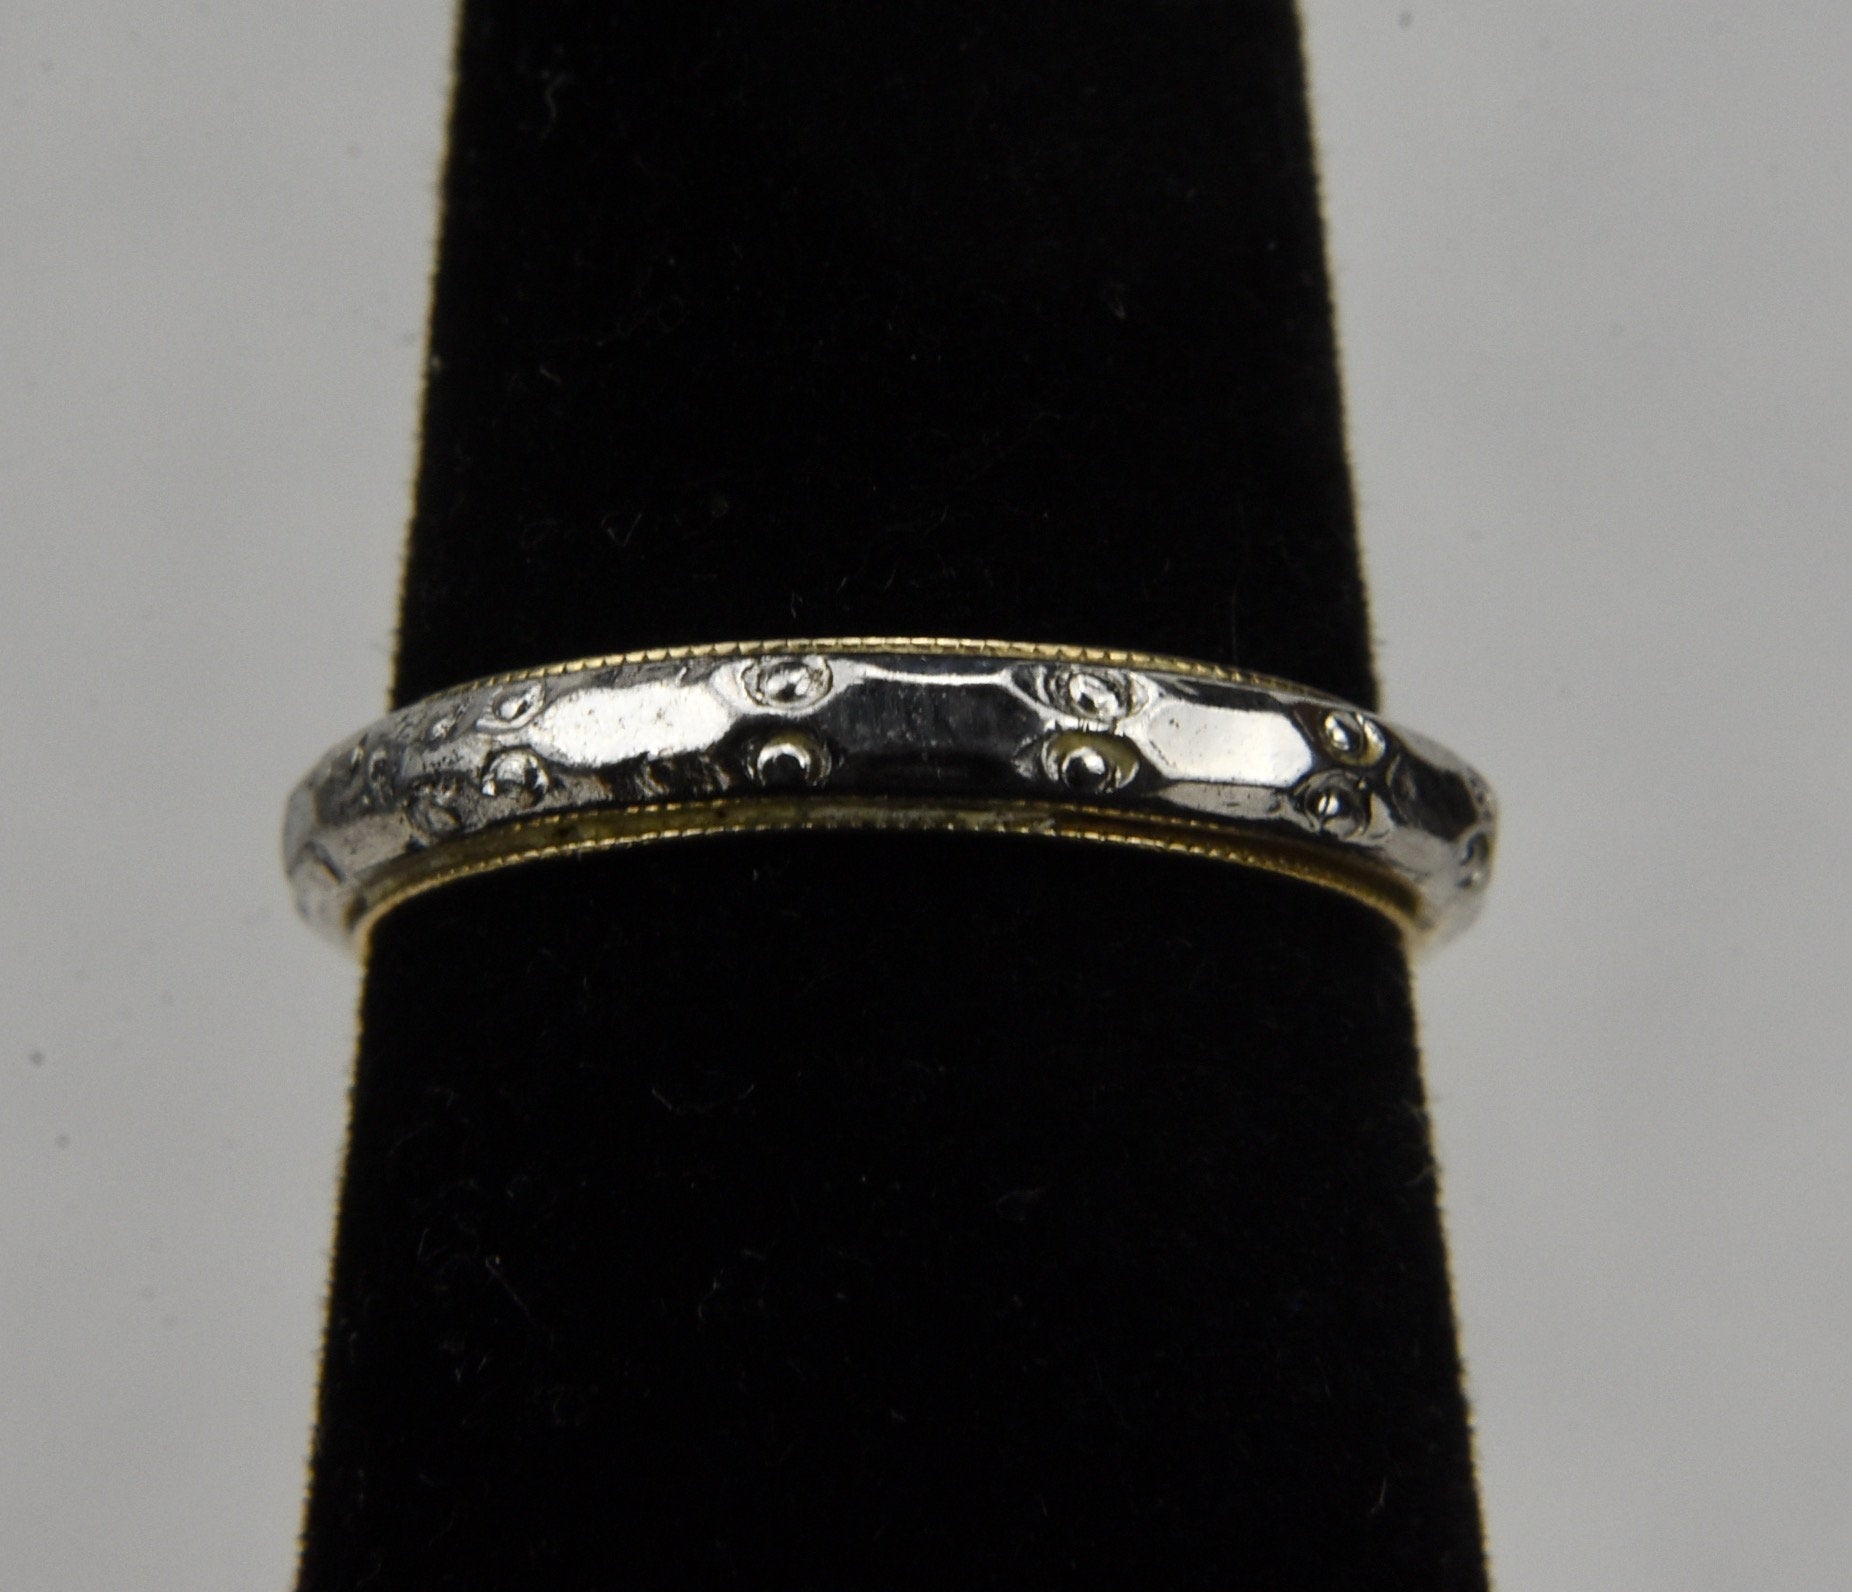 10k GF and Sterling Silver Rivet Band Ring - Size 4.75